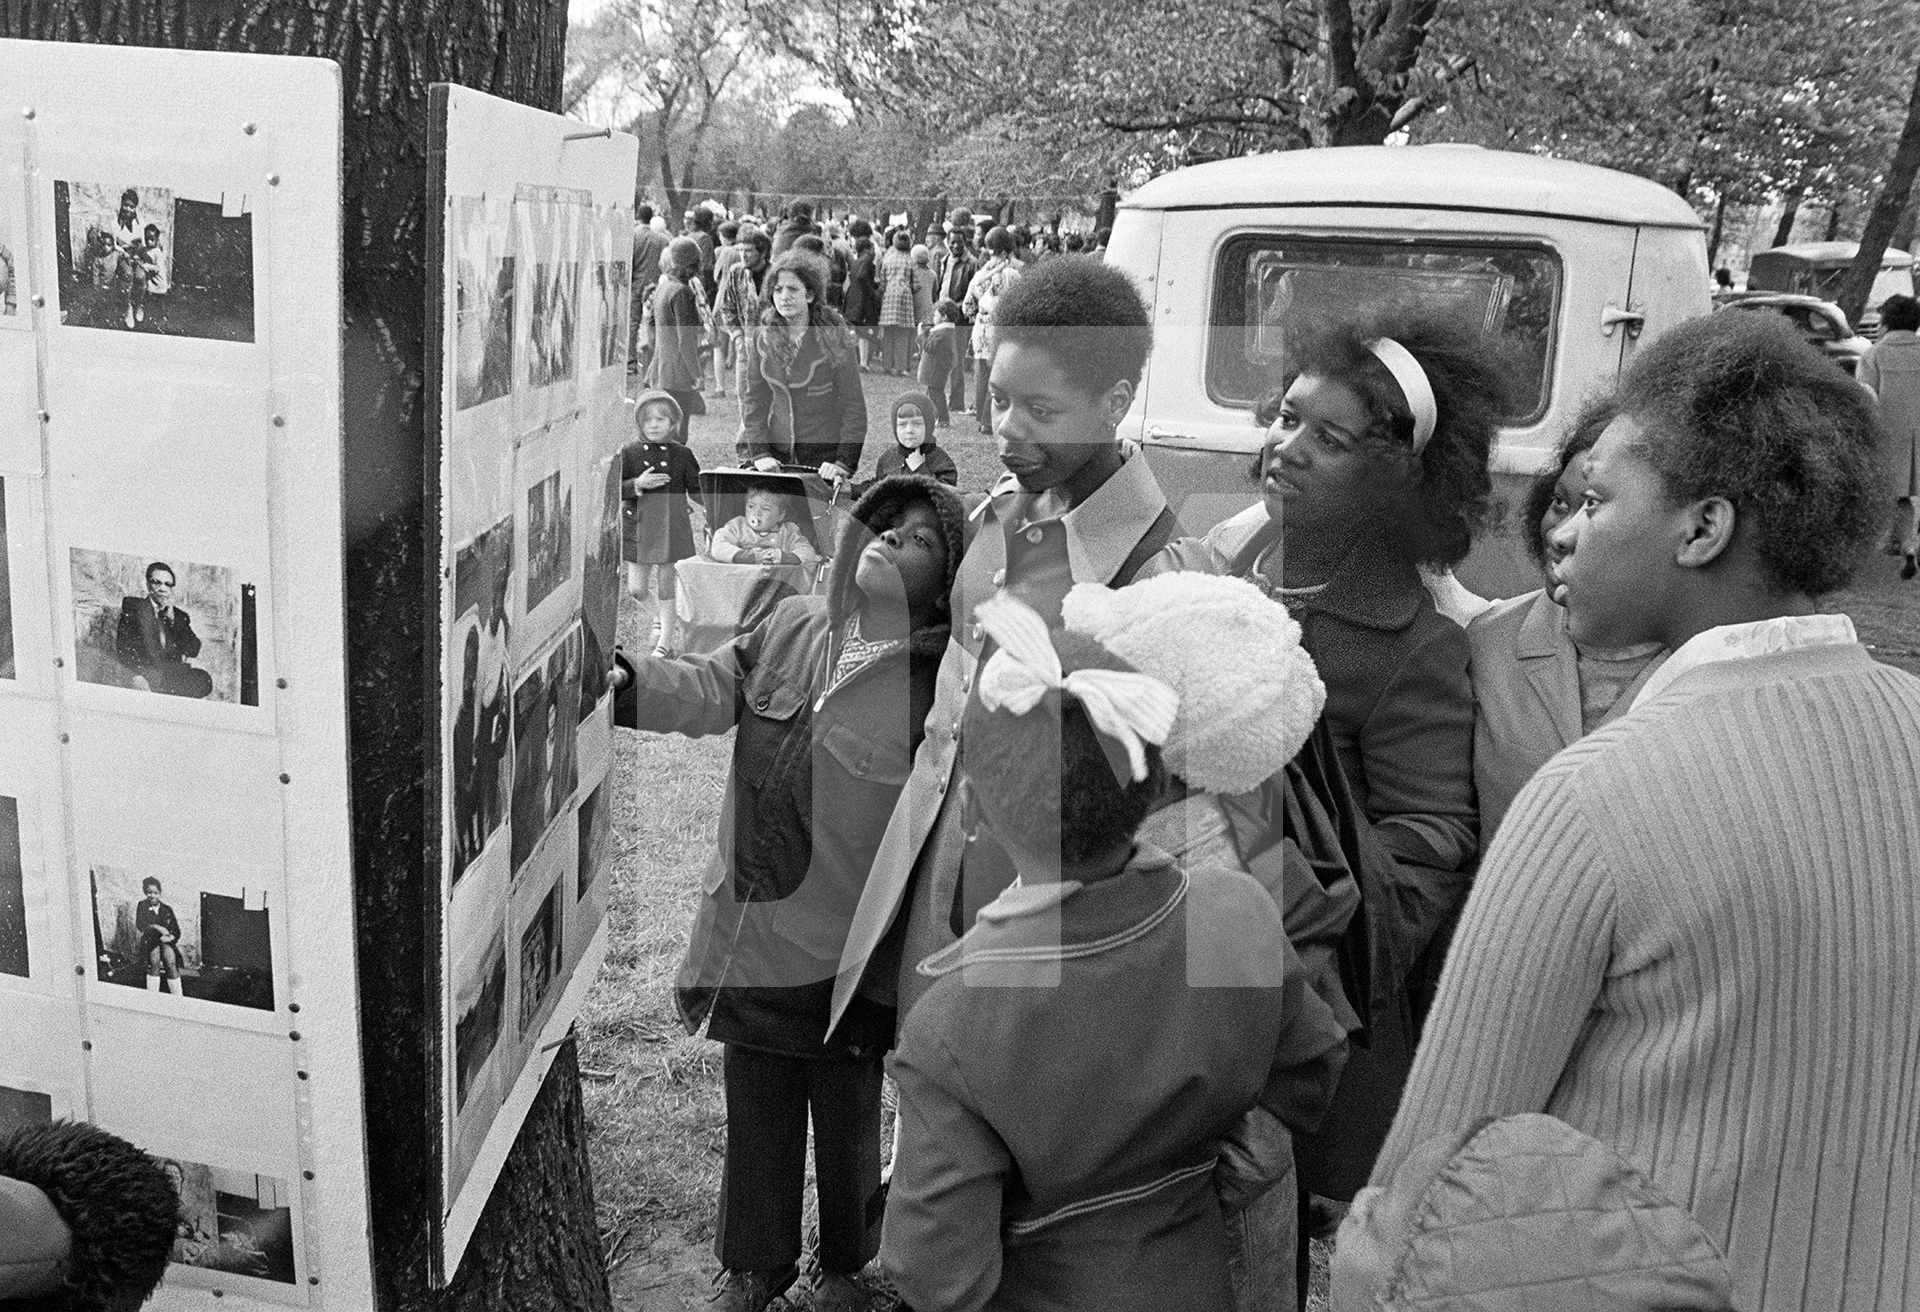 Impromptu exhibition of portraits made in The Shop on Greame Street. Caribbean Carnival, Alexandra Park, Moss Side, Manchester. Whitsun Bank Holiday, 1972 by Daniel Meadows